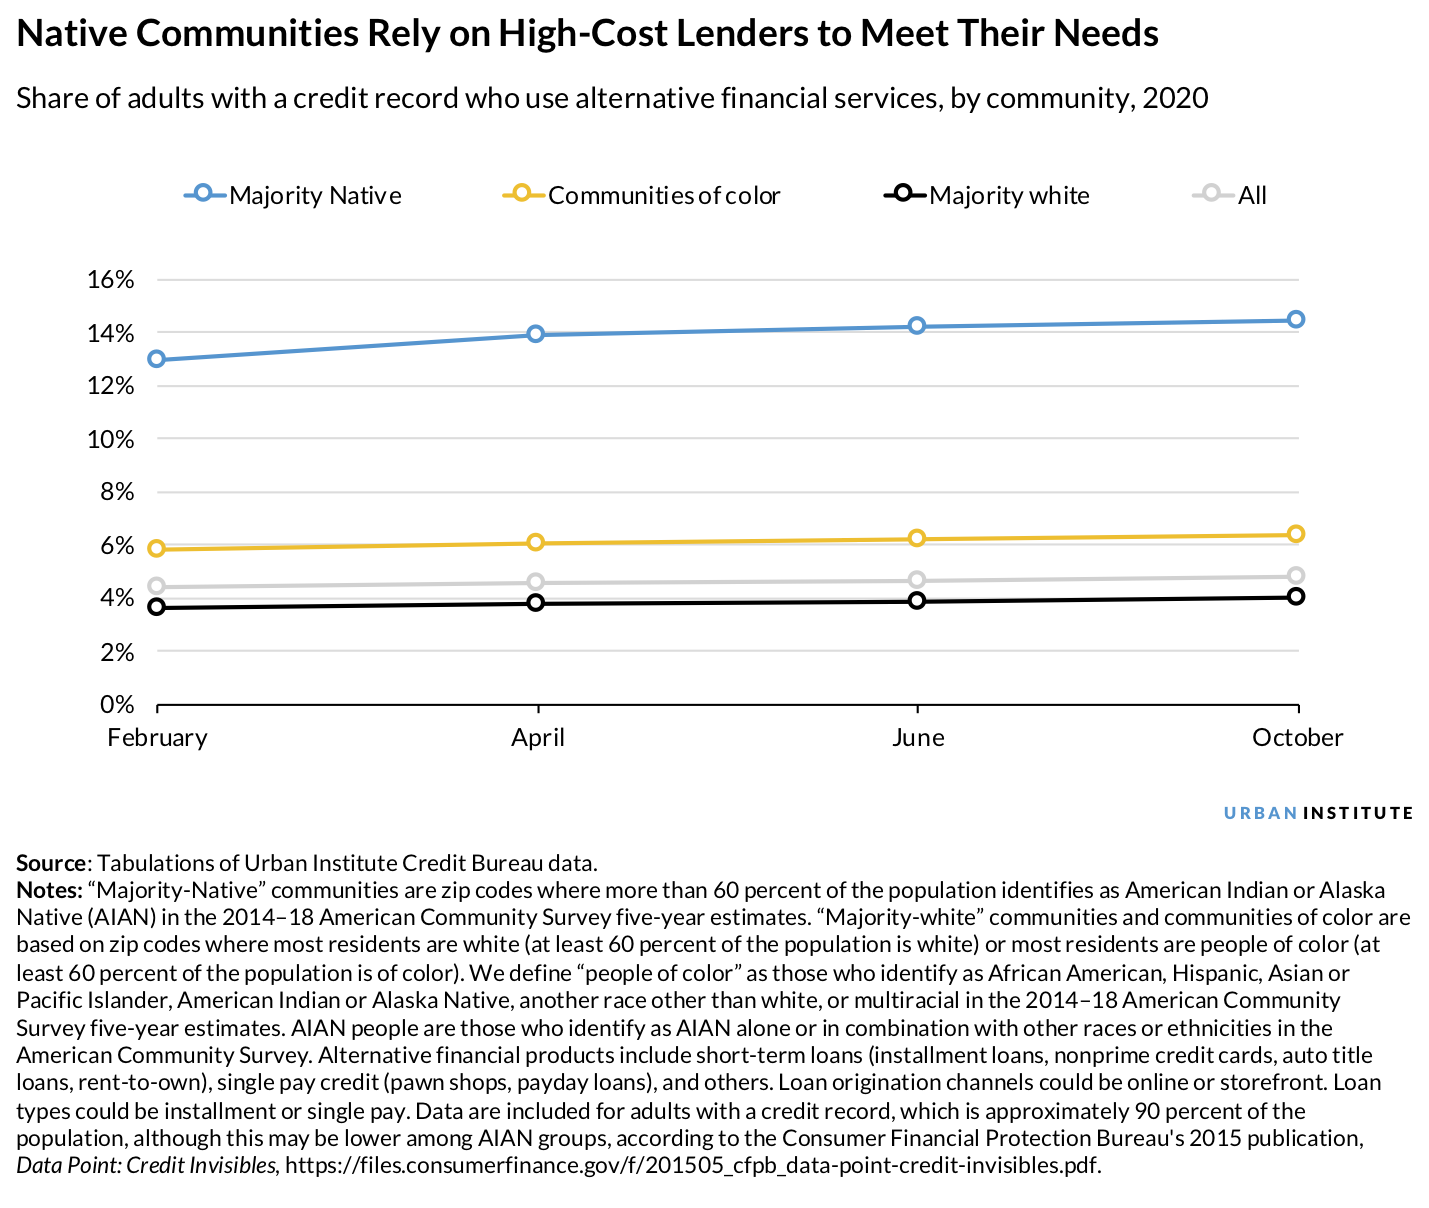 Line chart showing Native communities rely on high-cost lenders to meet their needs